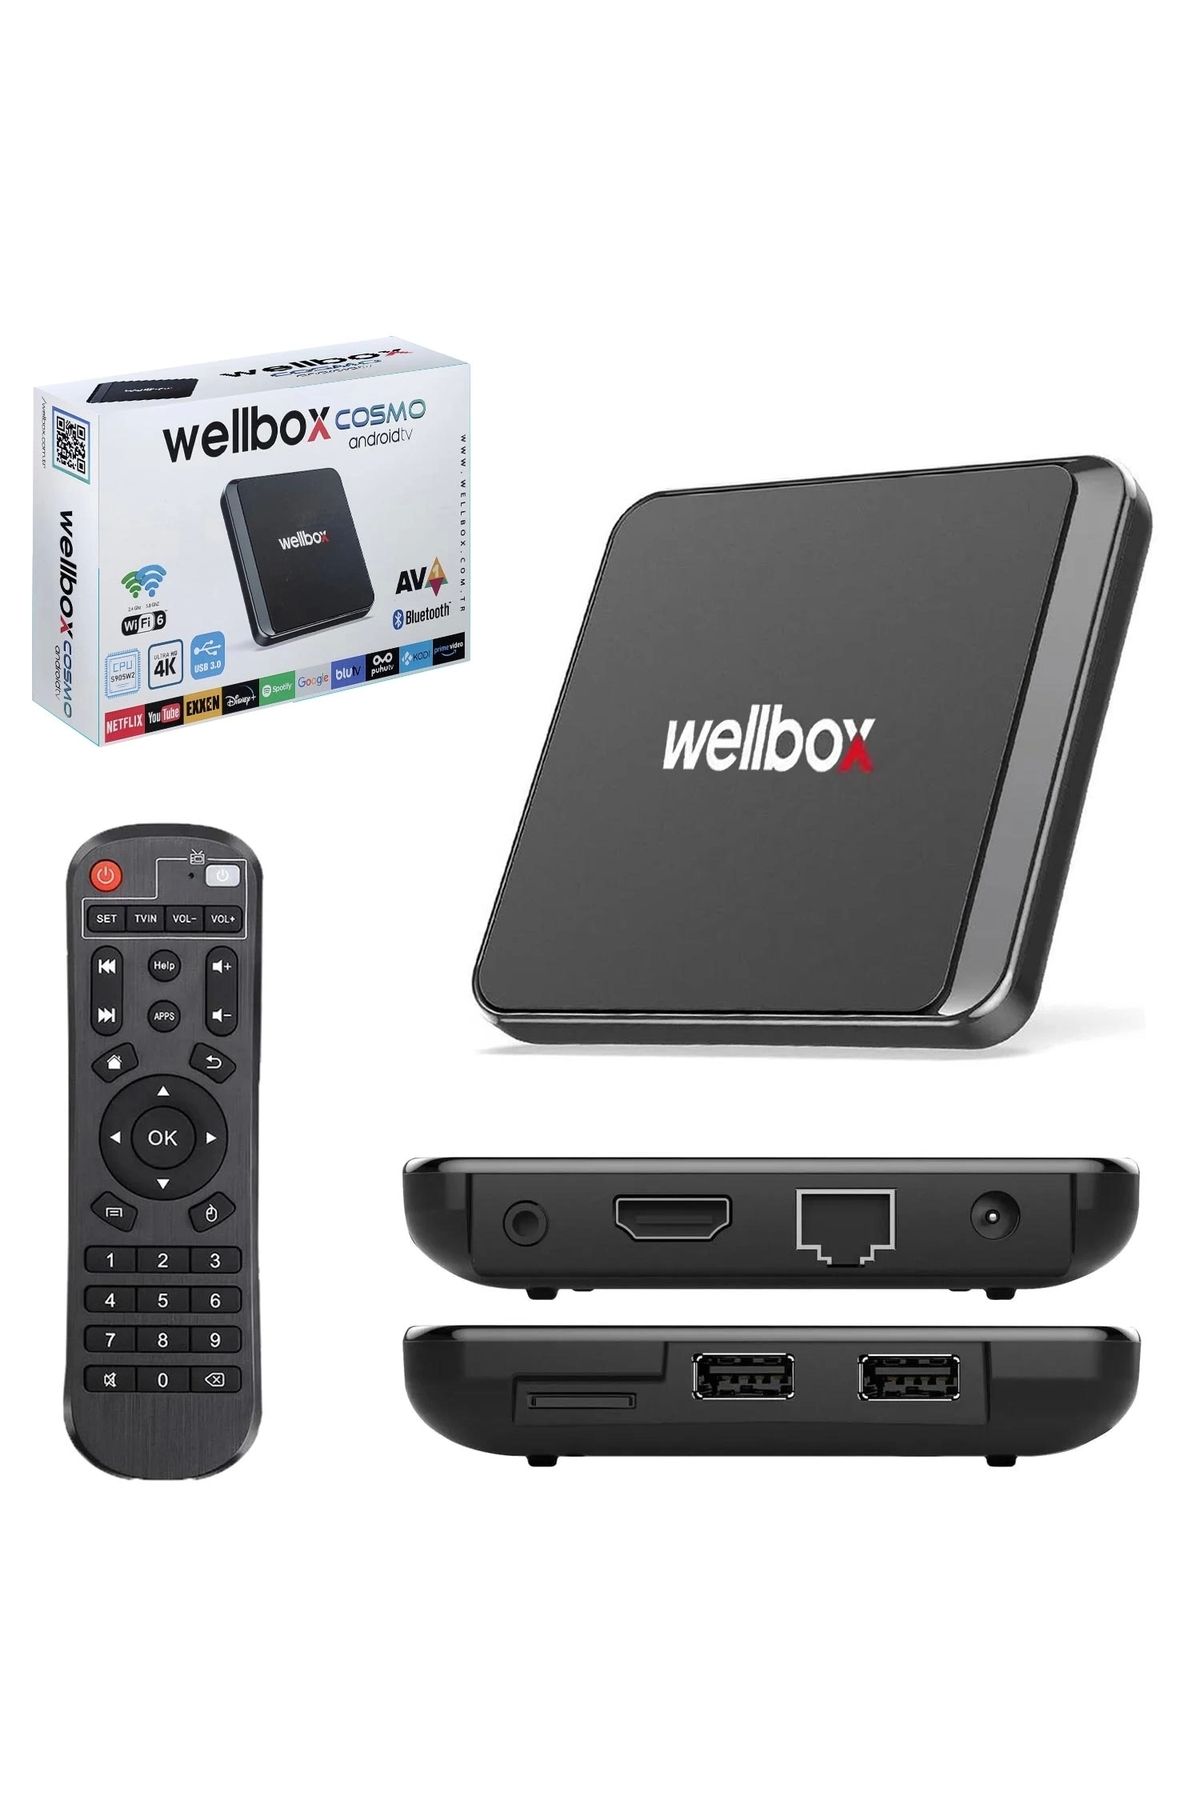 wellbox Cosmo Android Tv Box 2 16gb